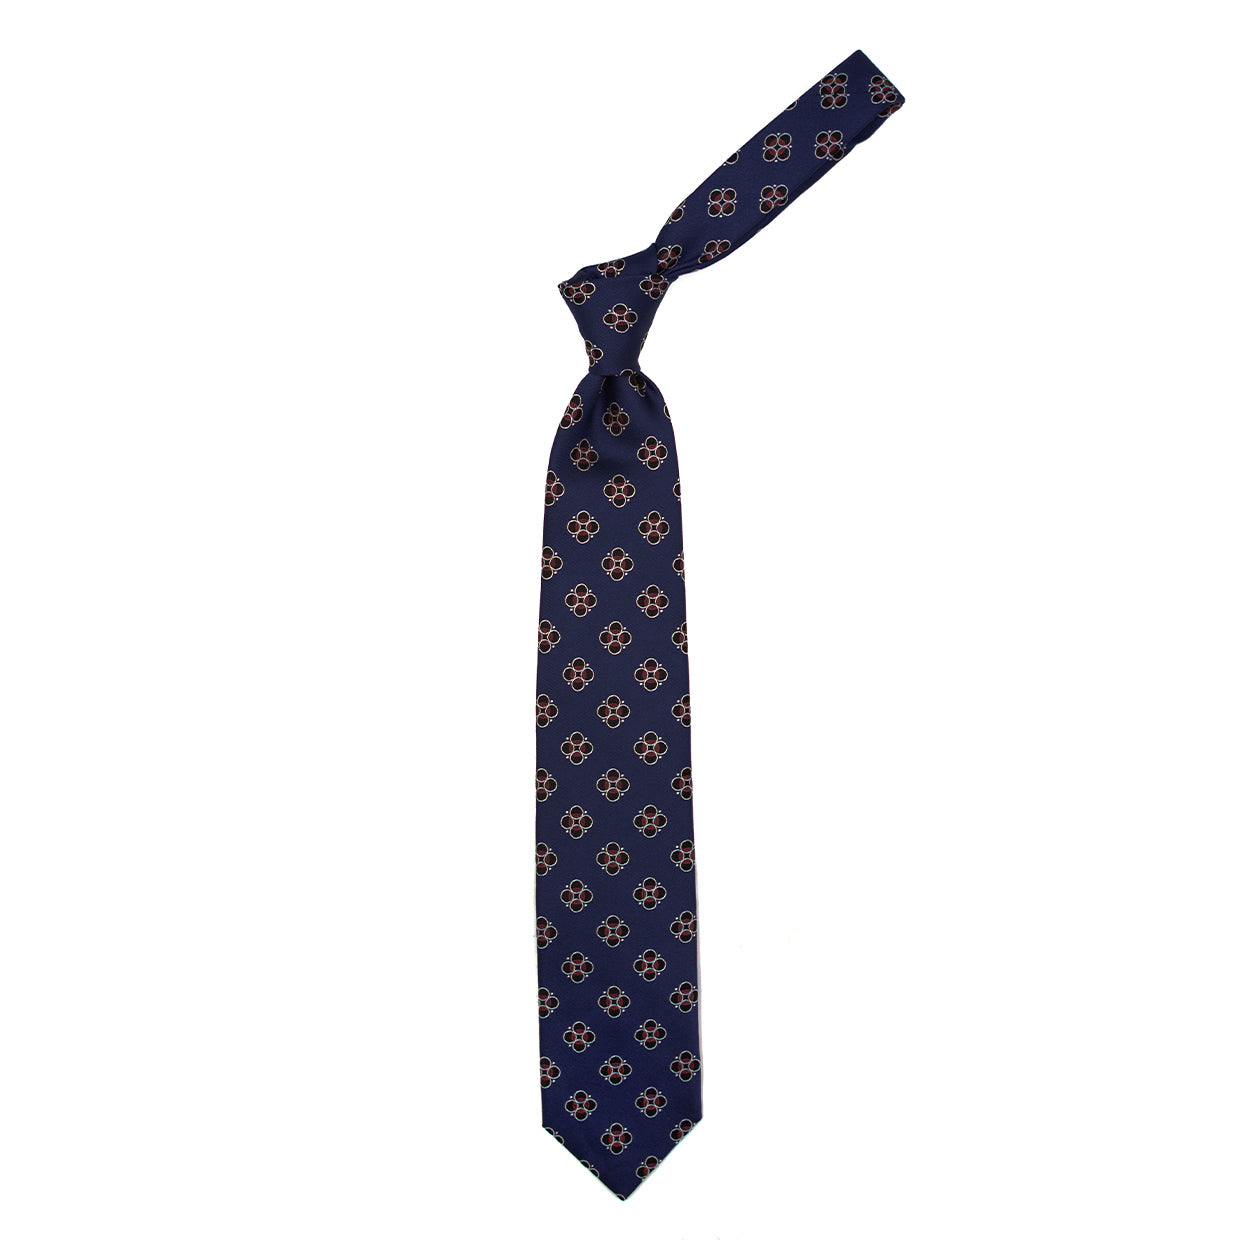 Blue tie with black, white and burgundy pattern